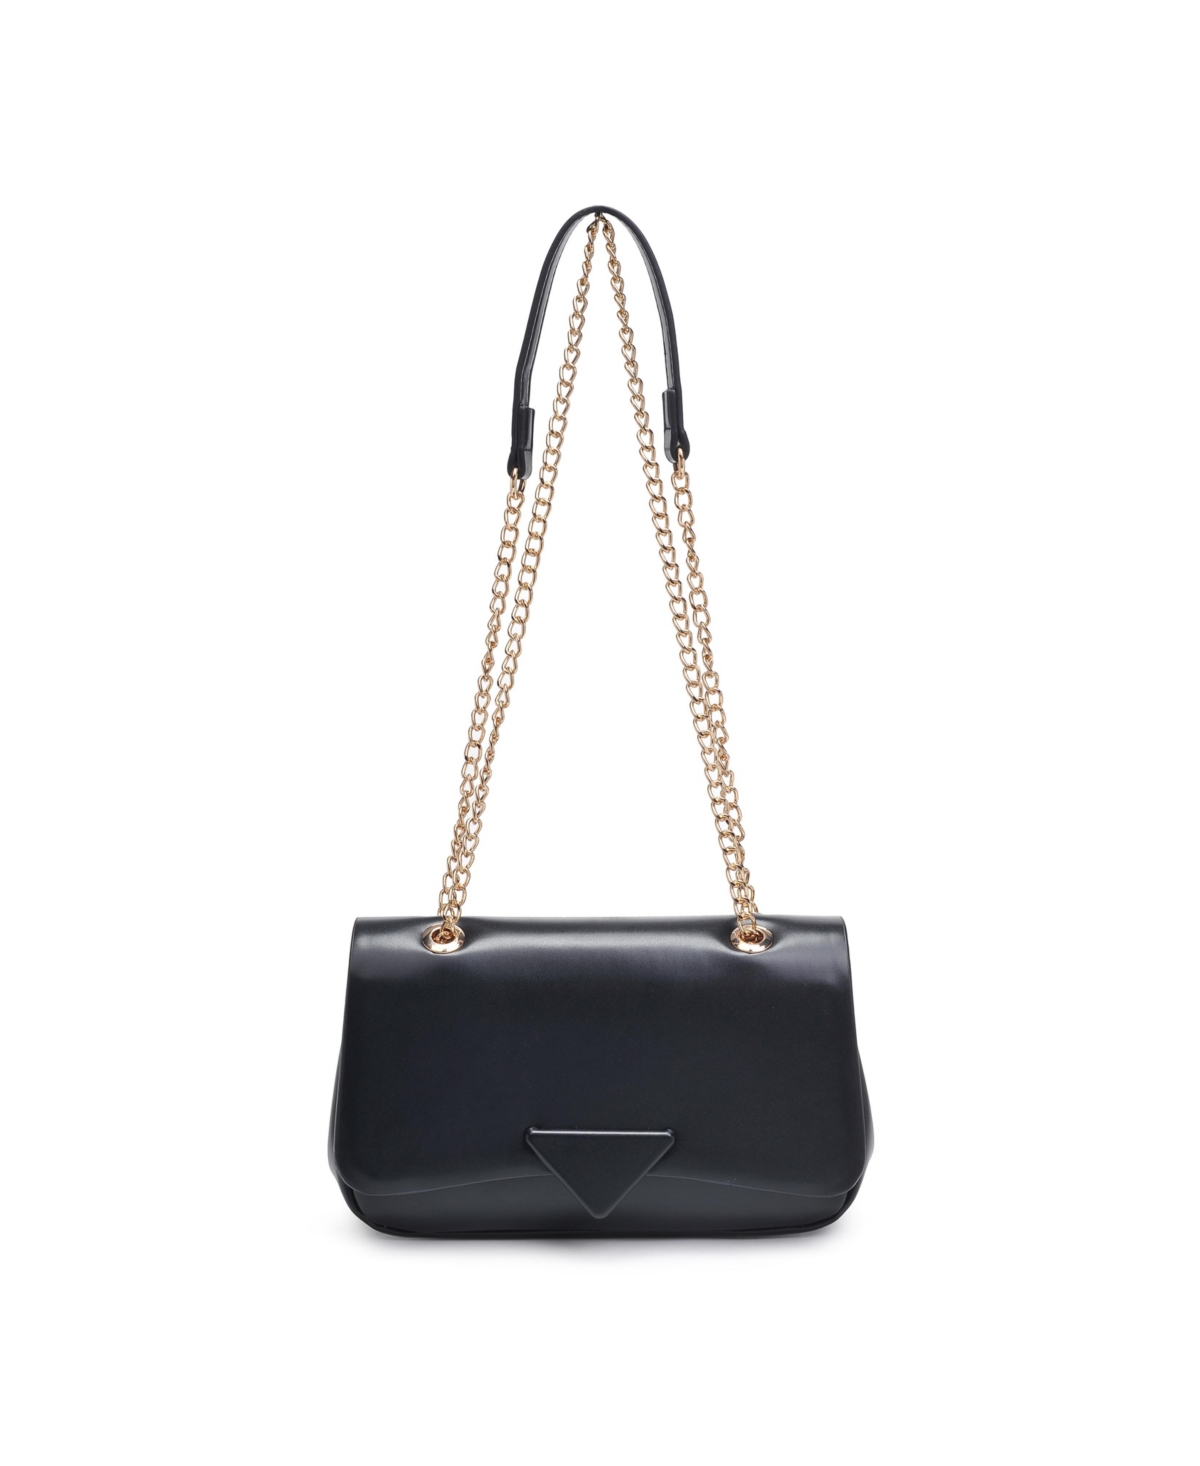 Urban Expressions Colette Crossbody In Black